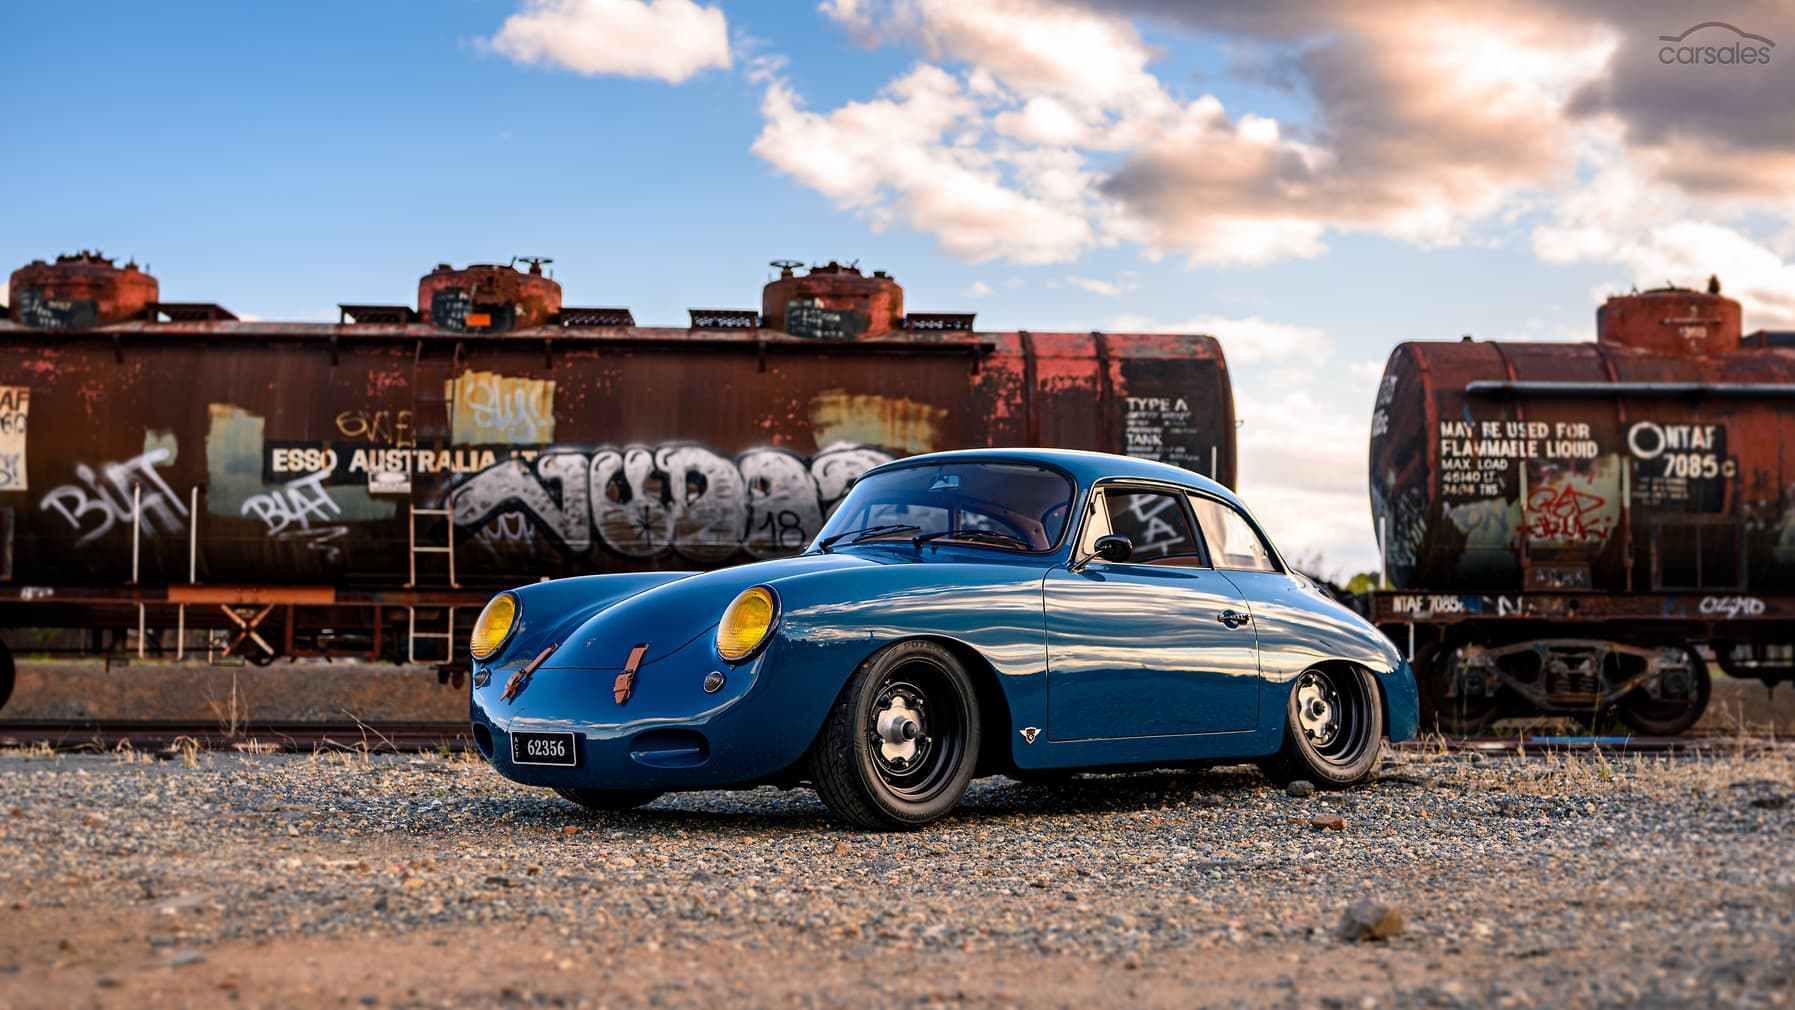 Porsche Notchback: This Stunning 1962 356B Is For Sale In Australia… For A Very Cool Price